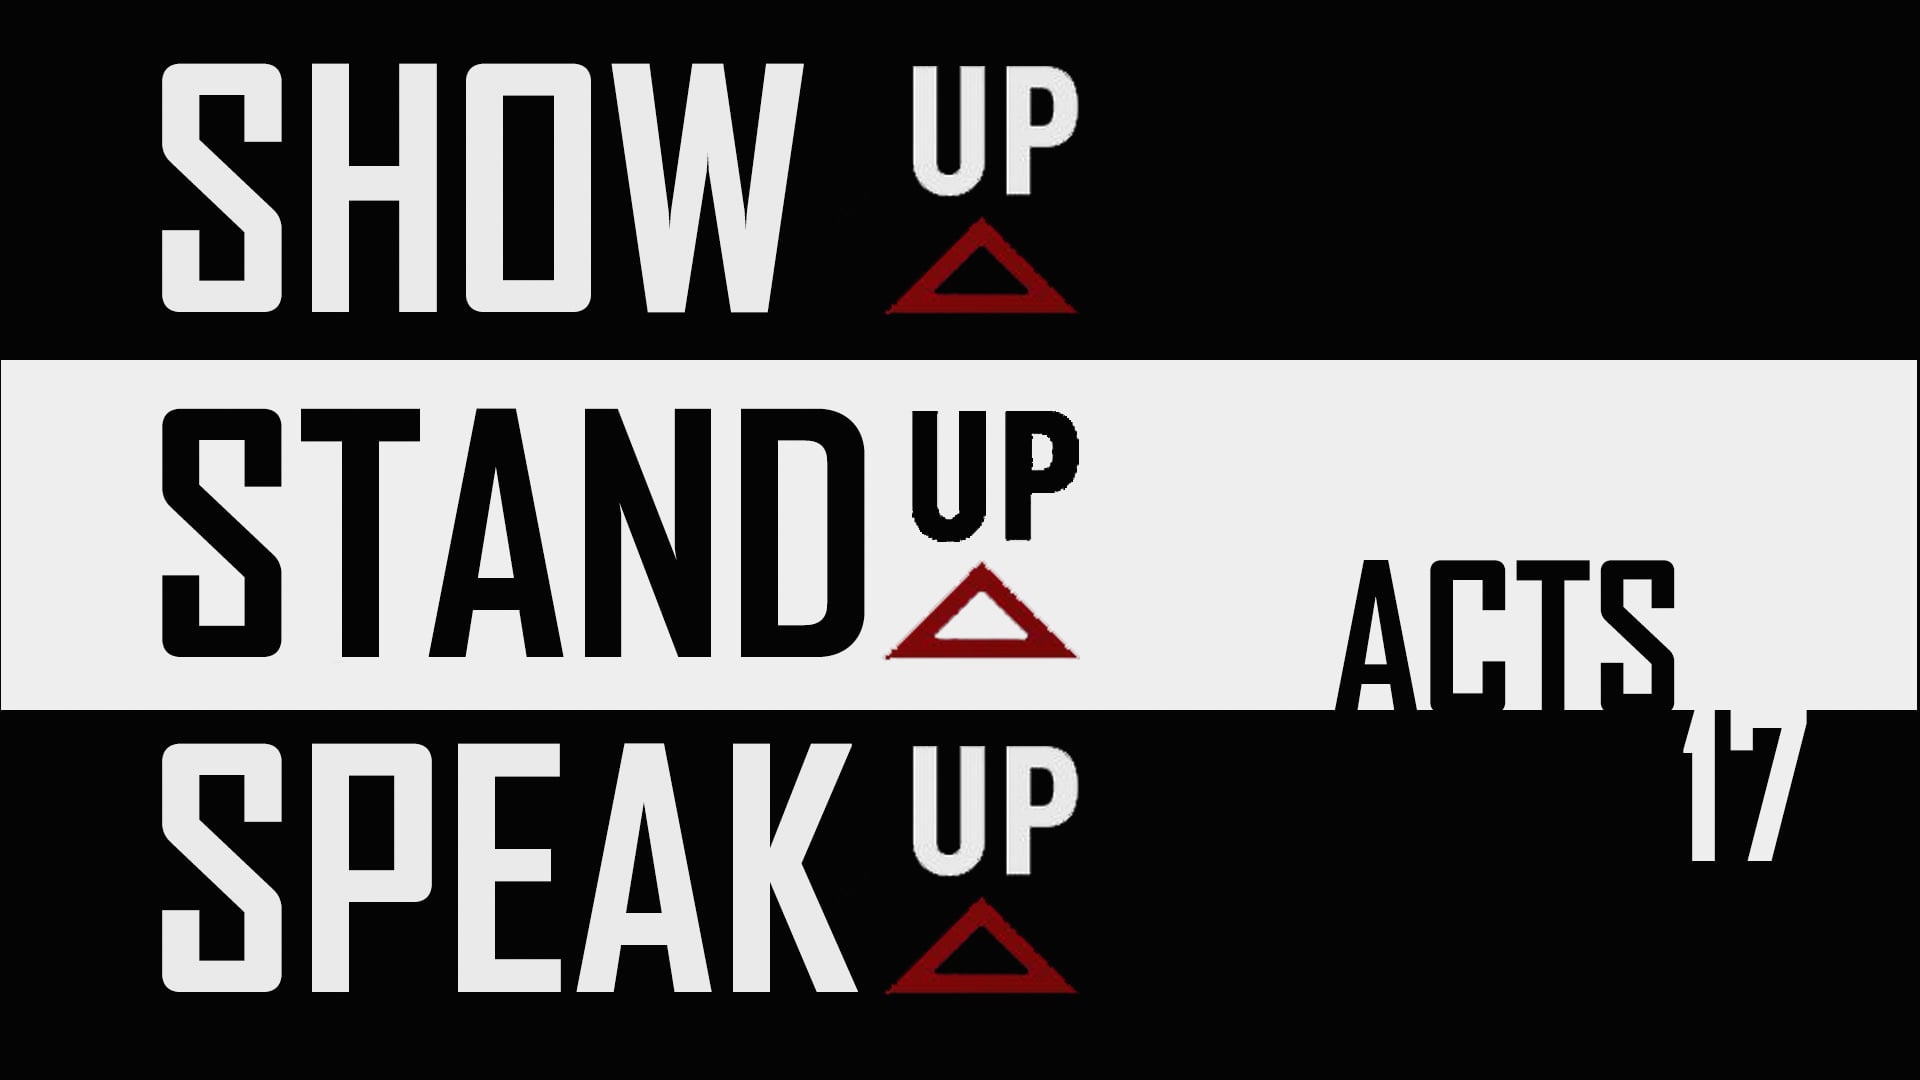 10/3/21 - SHOW UP, STAND UP, SPEAK UP